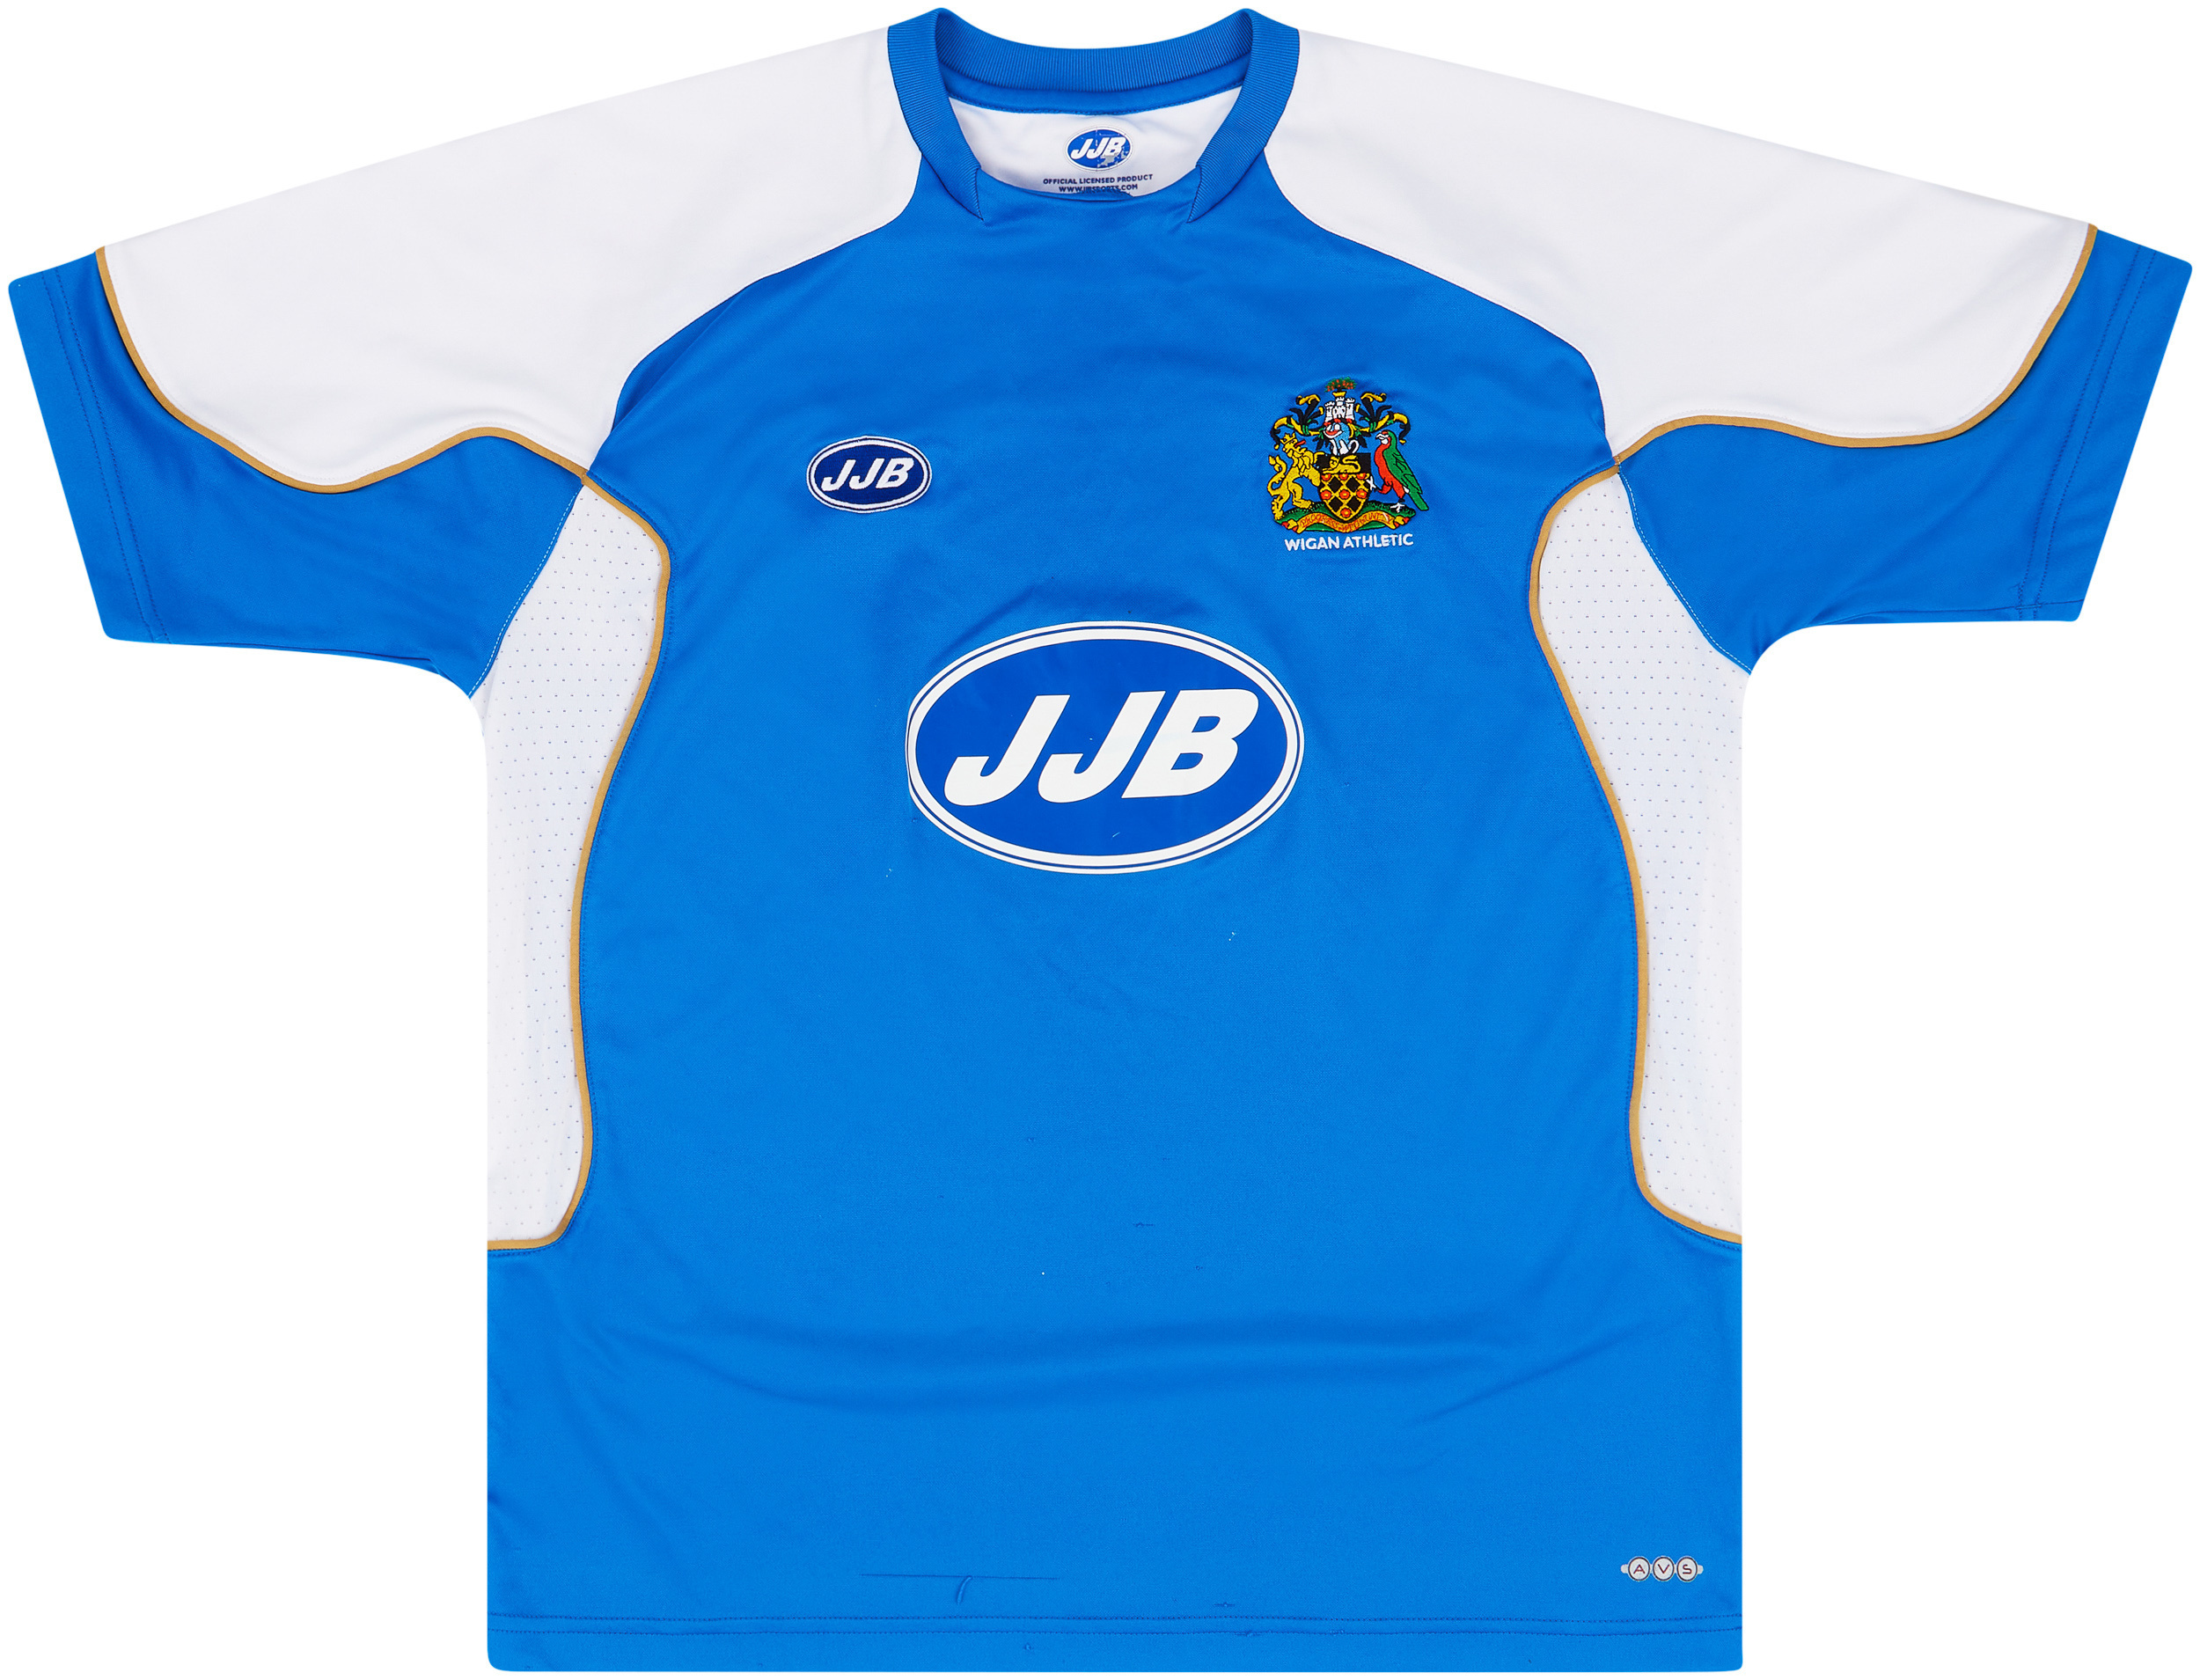 2006-07 Wigan Athletic Home Shirt - 6/10 - ()